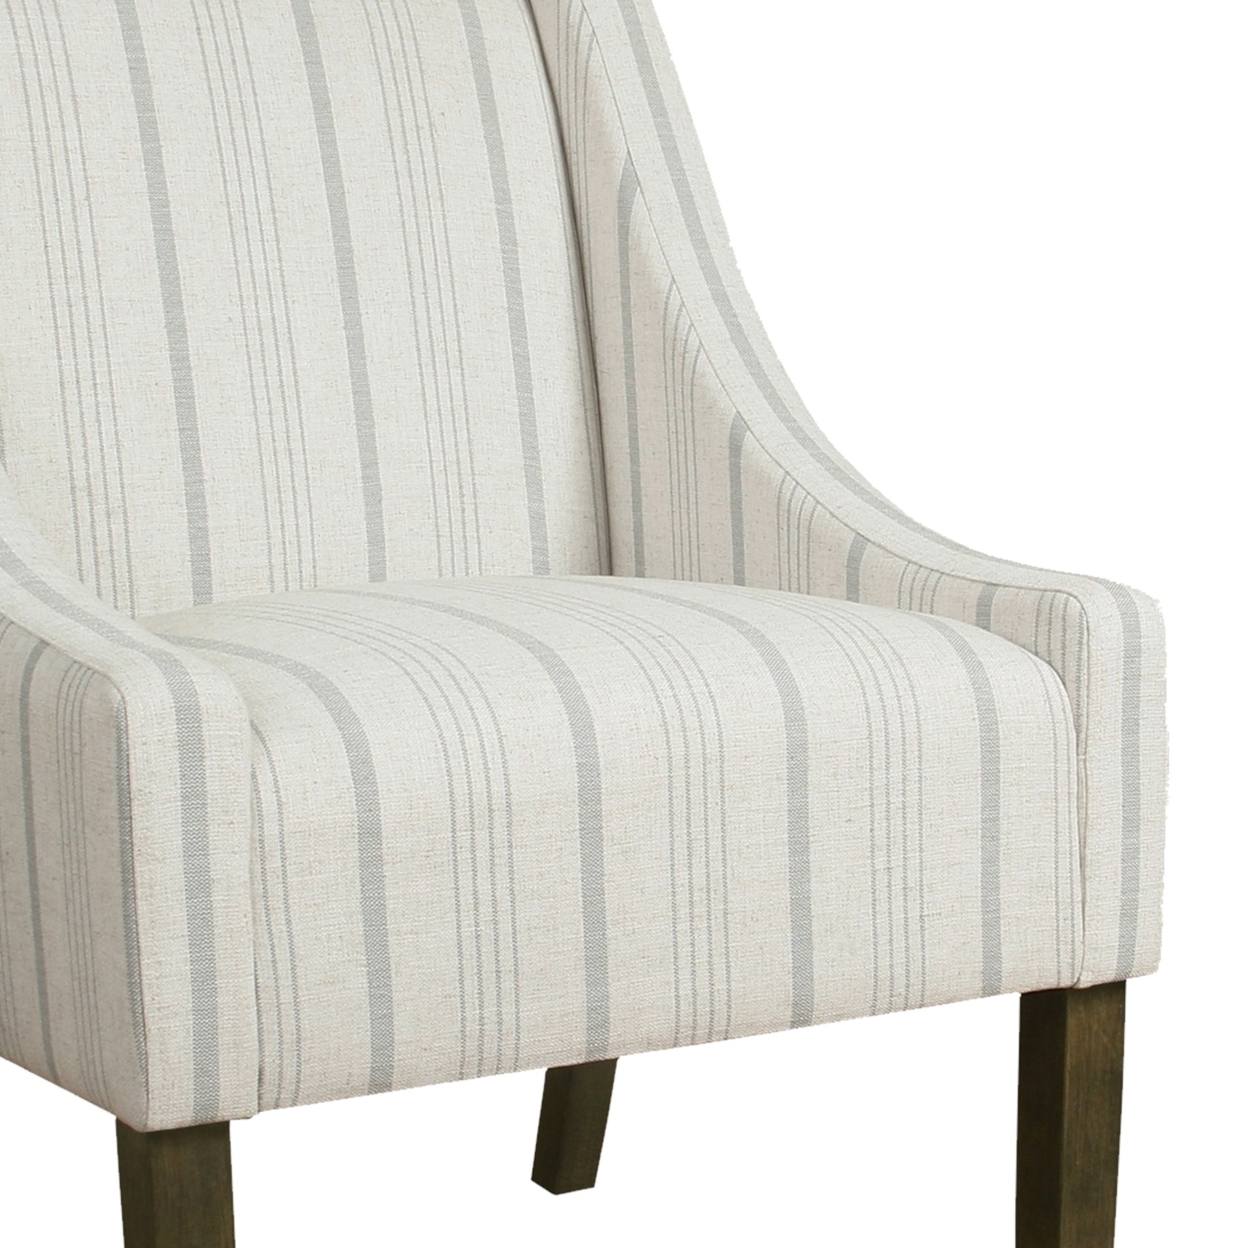 Fabric Upholstered Wooden Accent Chair With Stripe Pattern And Swooping Armrests, Multicolor- Saltoro Sherpi